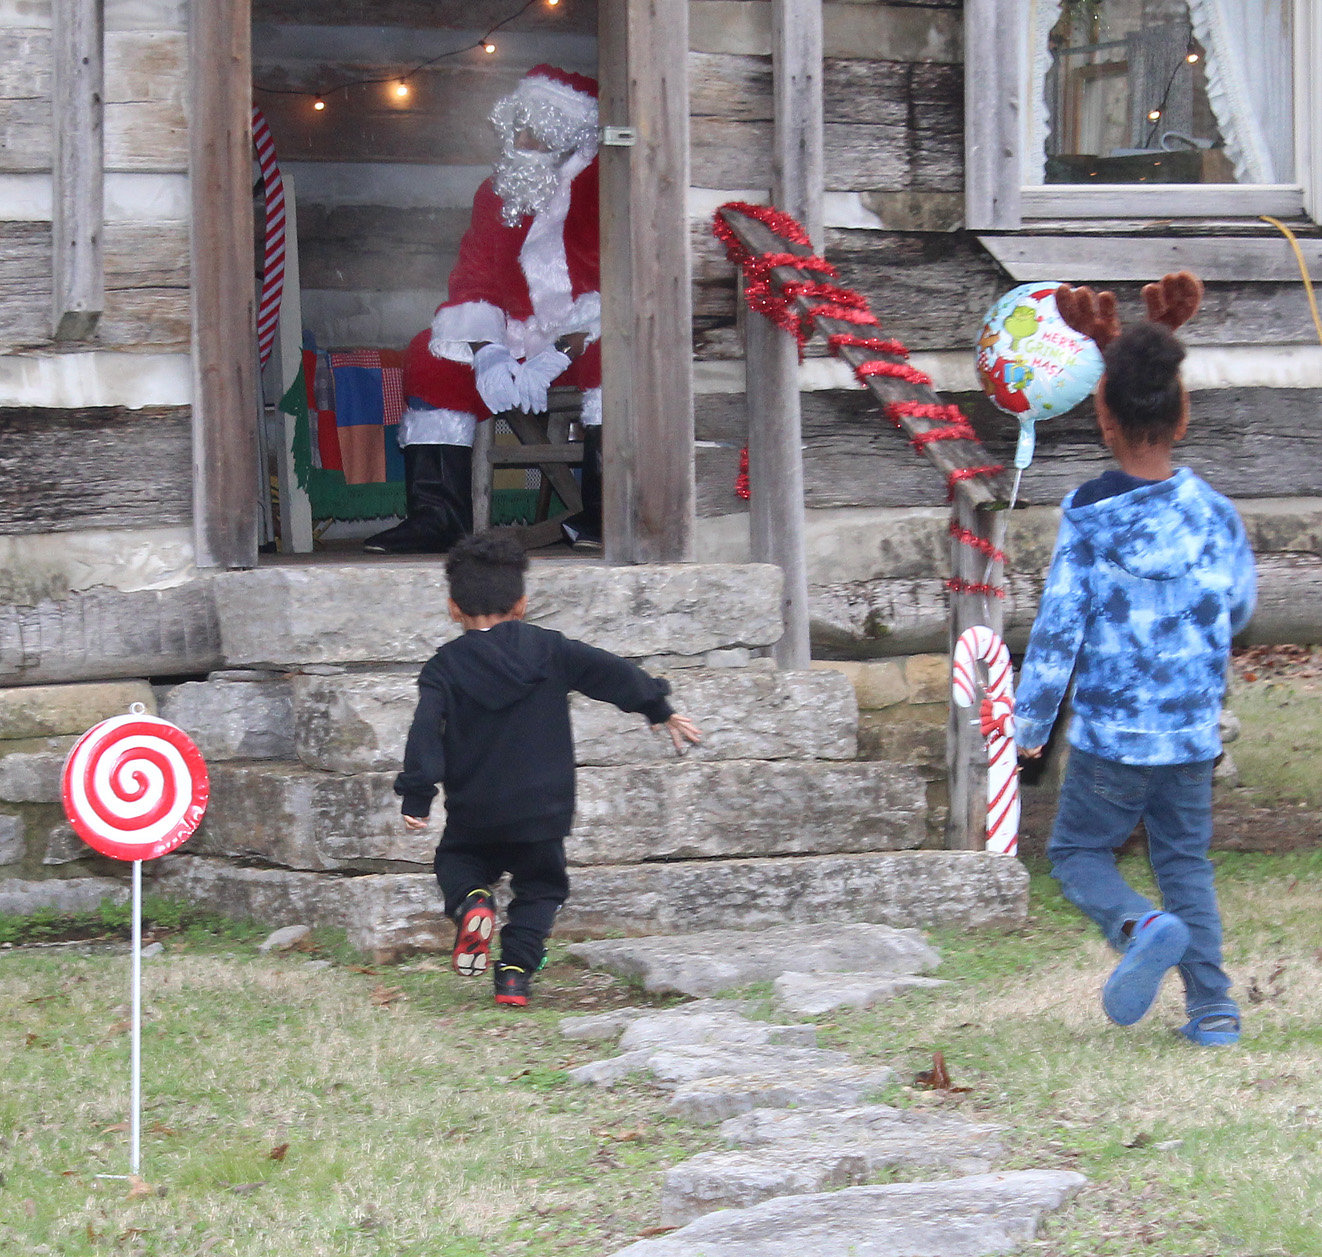 Kids ran to Santa, who was waiting inside the replica log cabin behind the main house.